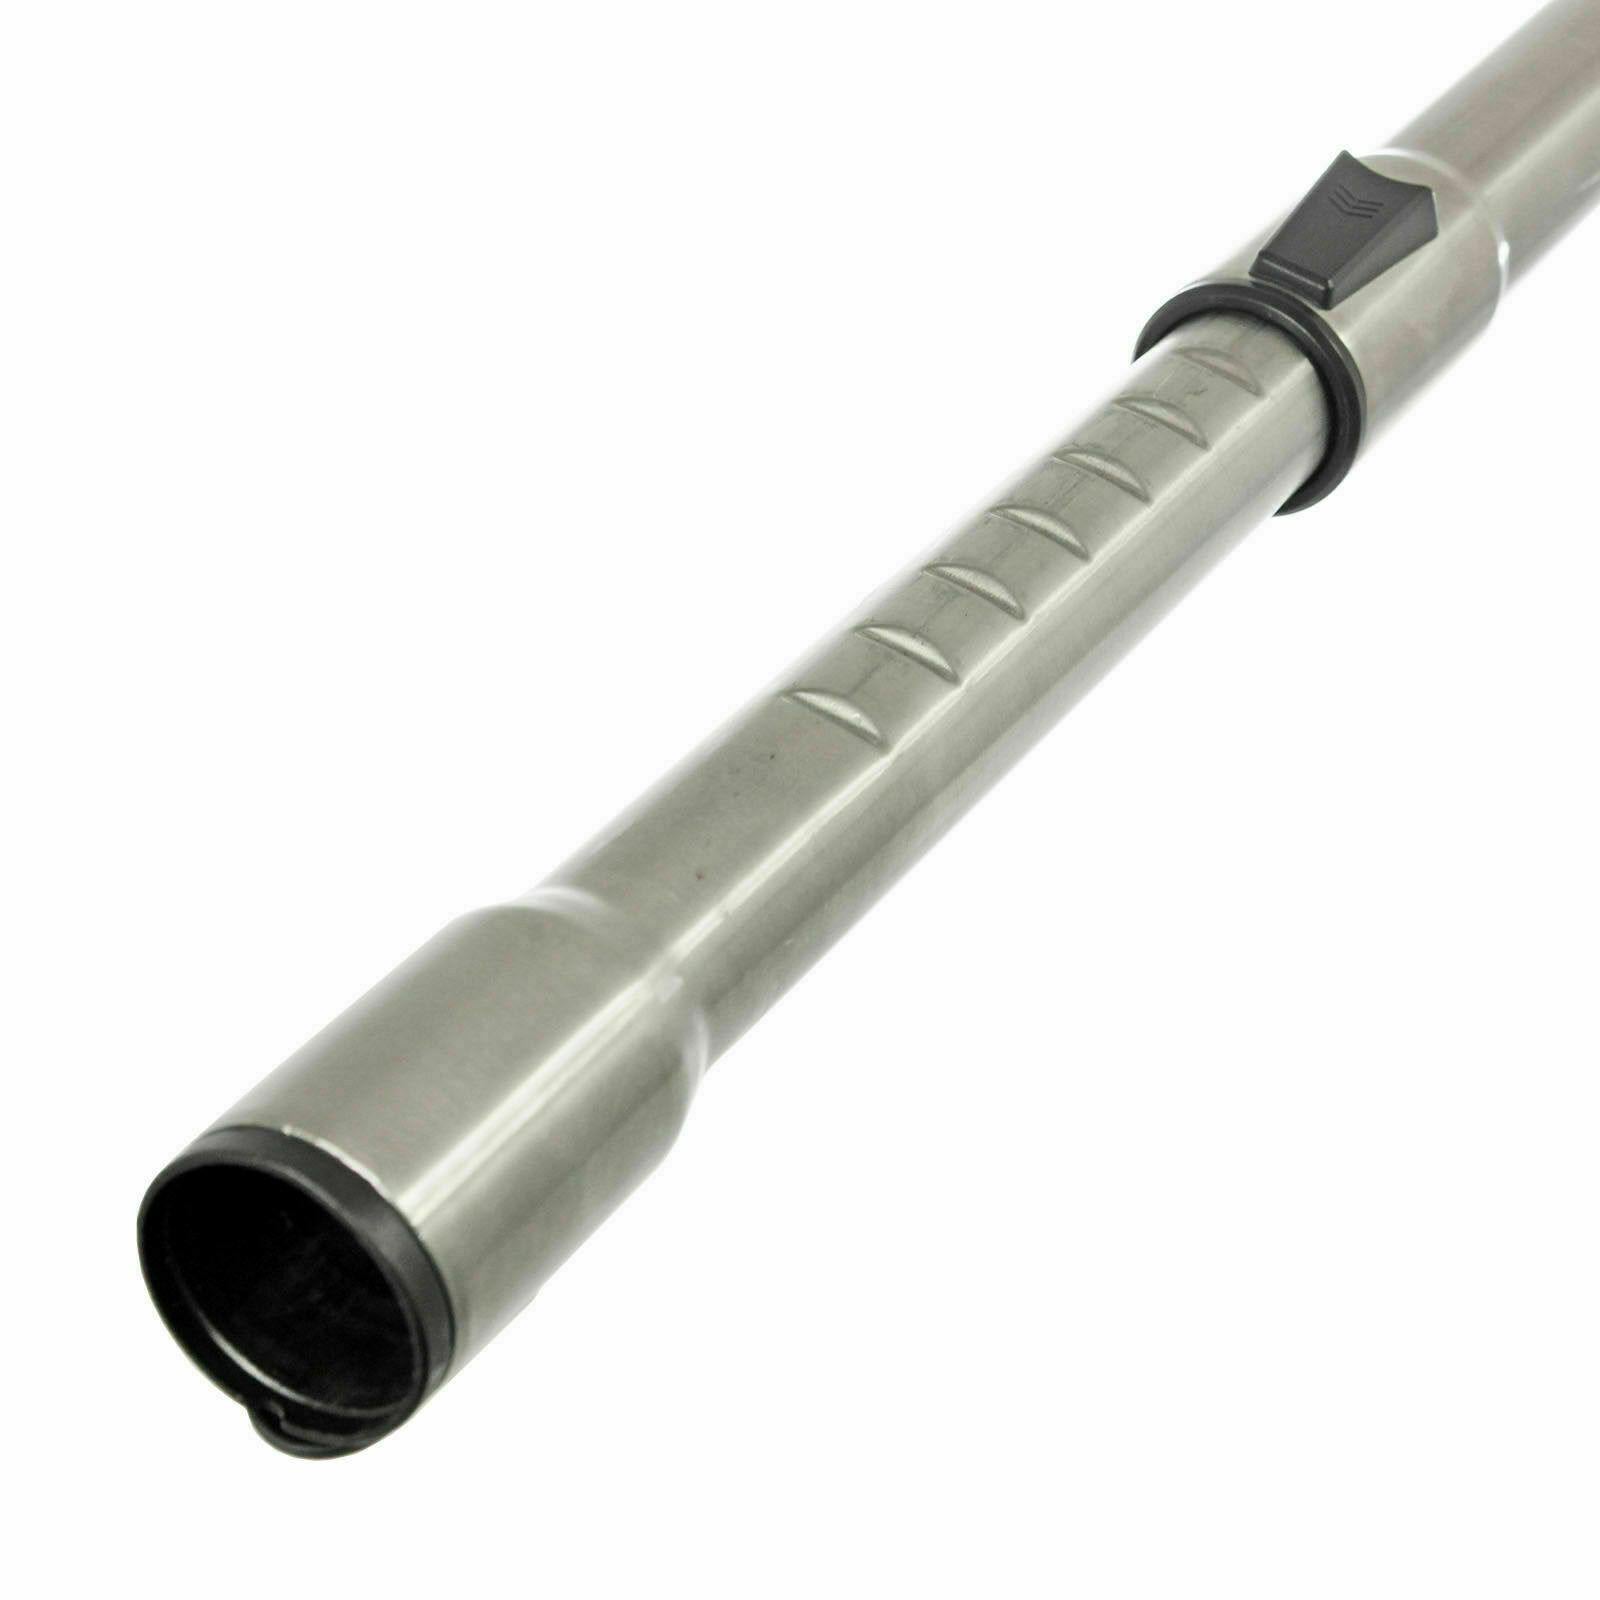 Telescopic Extension Tube Pipe Rod For Miele S5311 SBB S5211 S5580 S5360 S5310 Sparesbarn